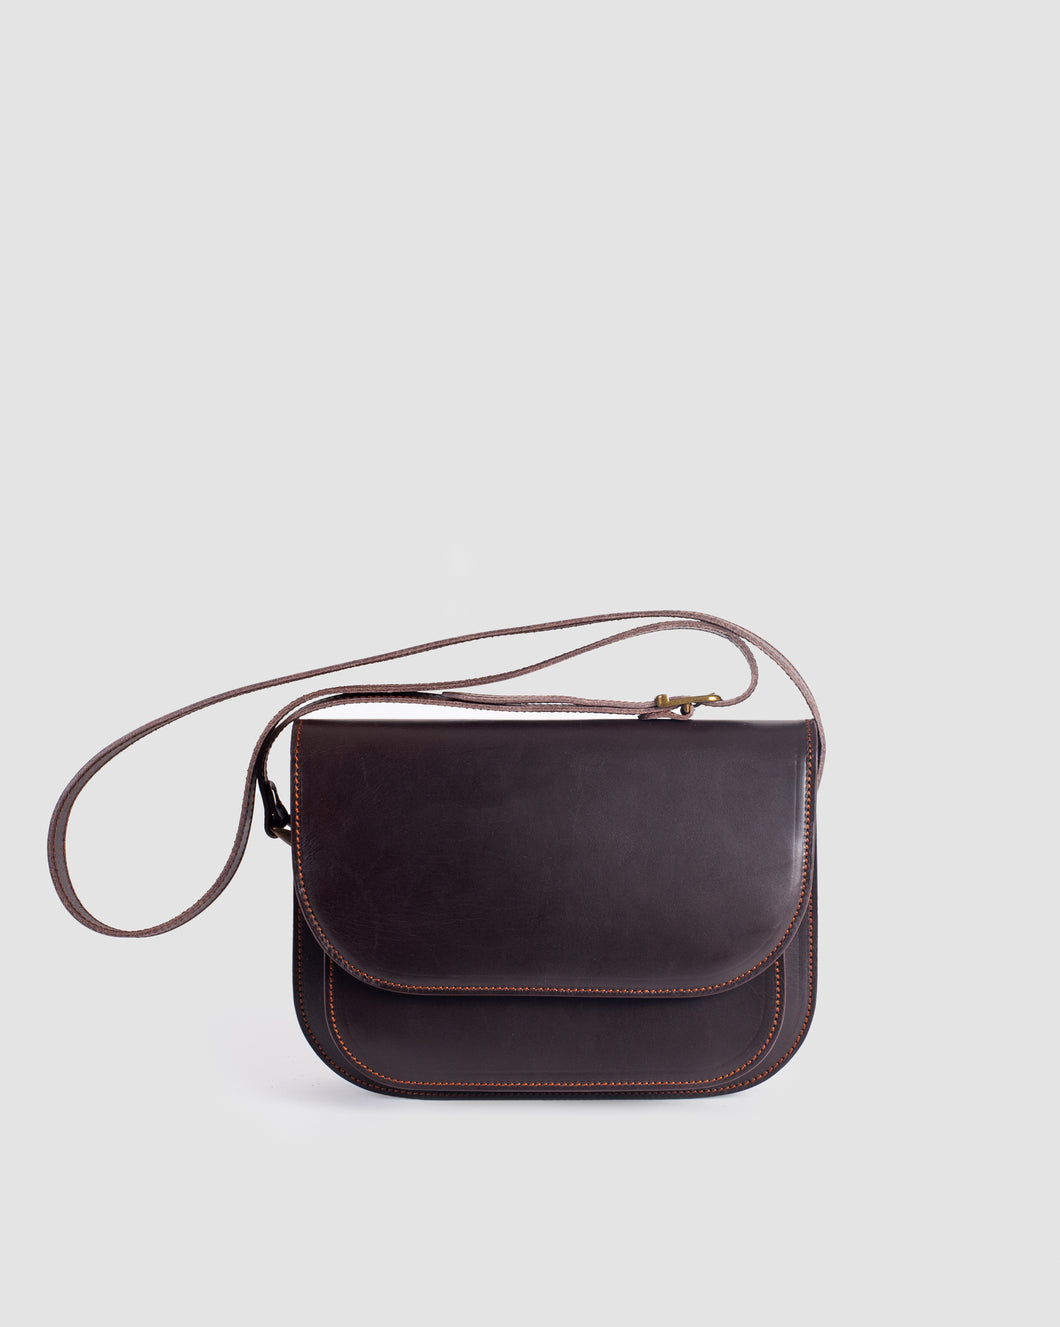 Chocolate brown natural leather pocket